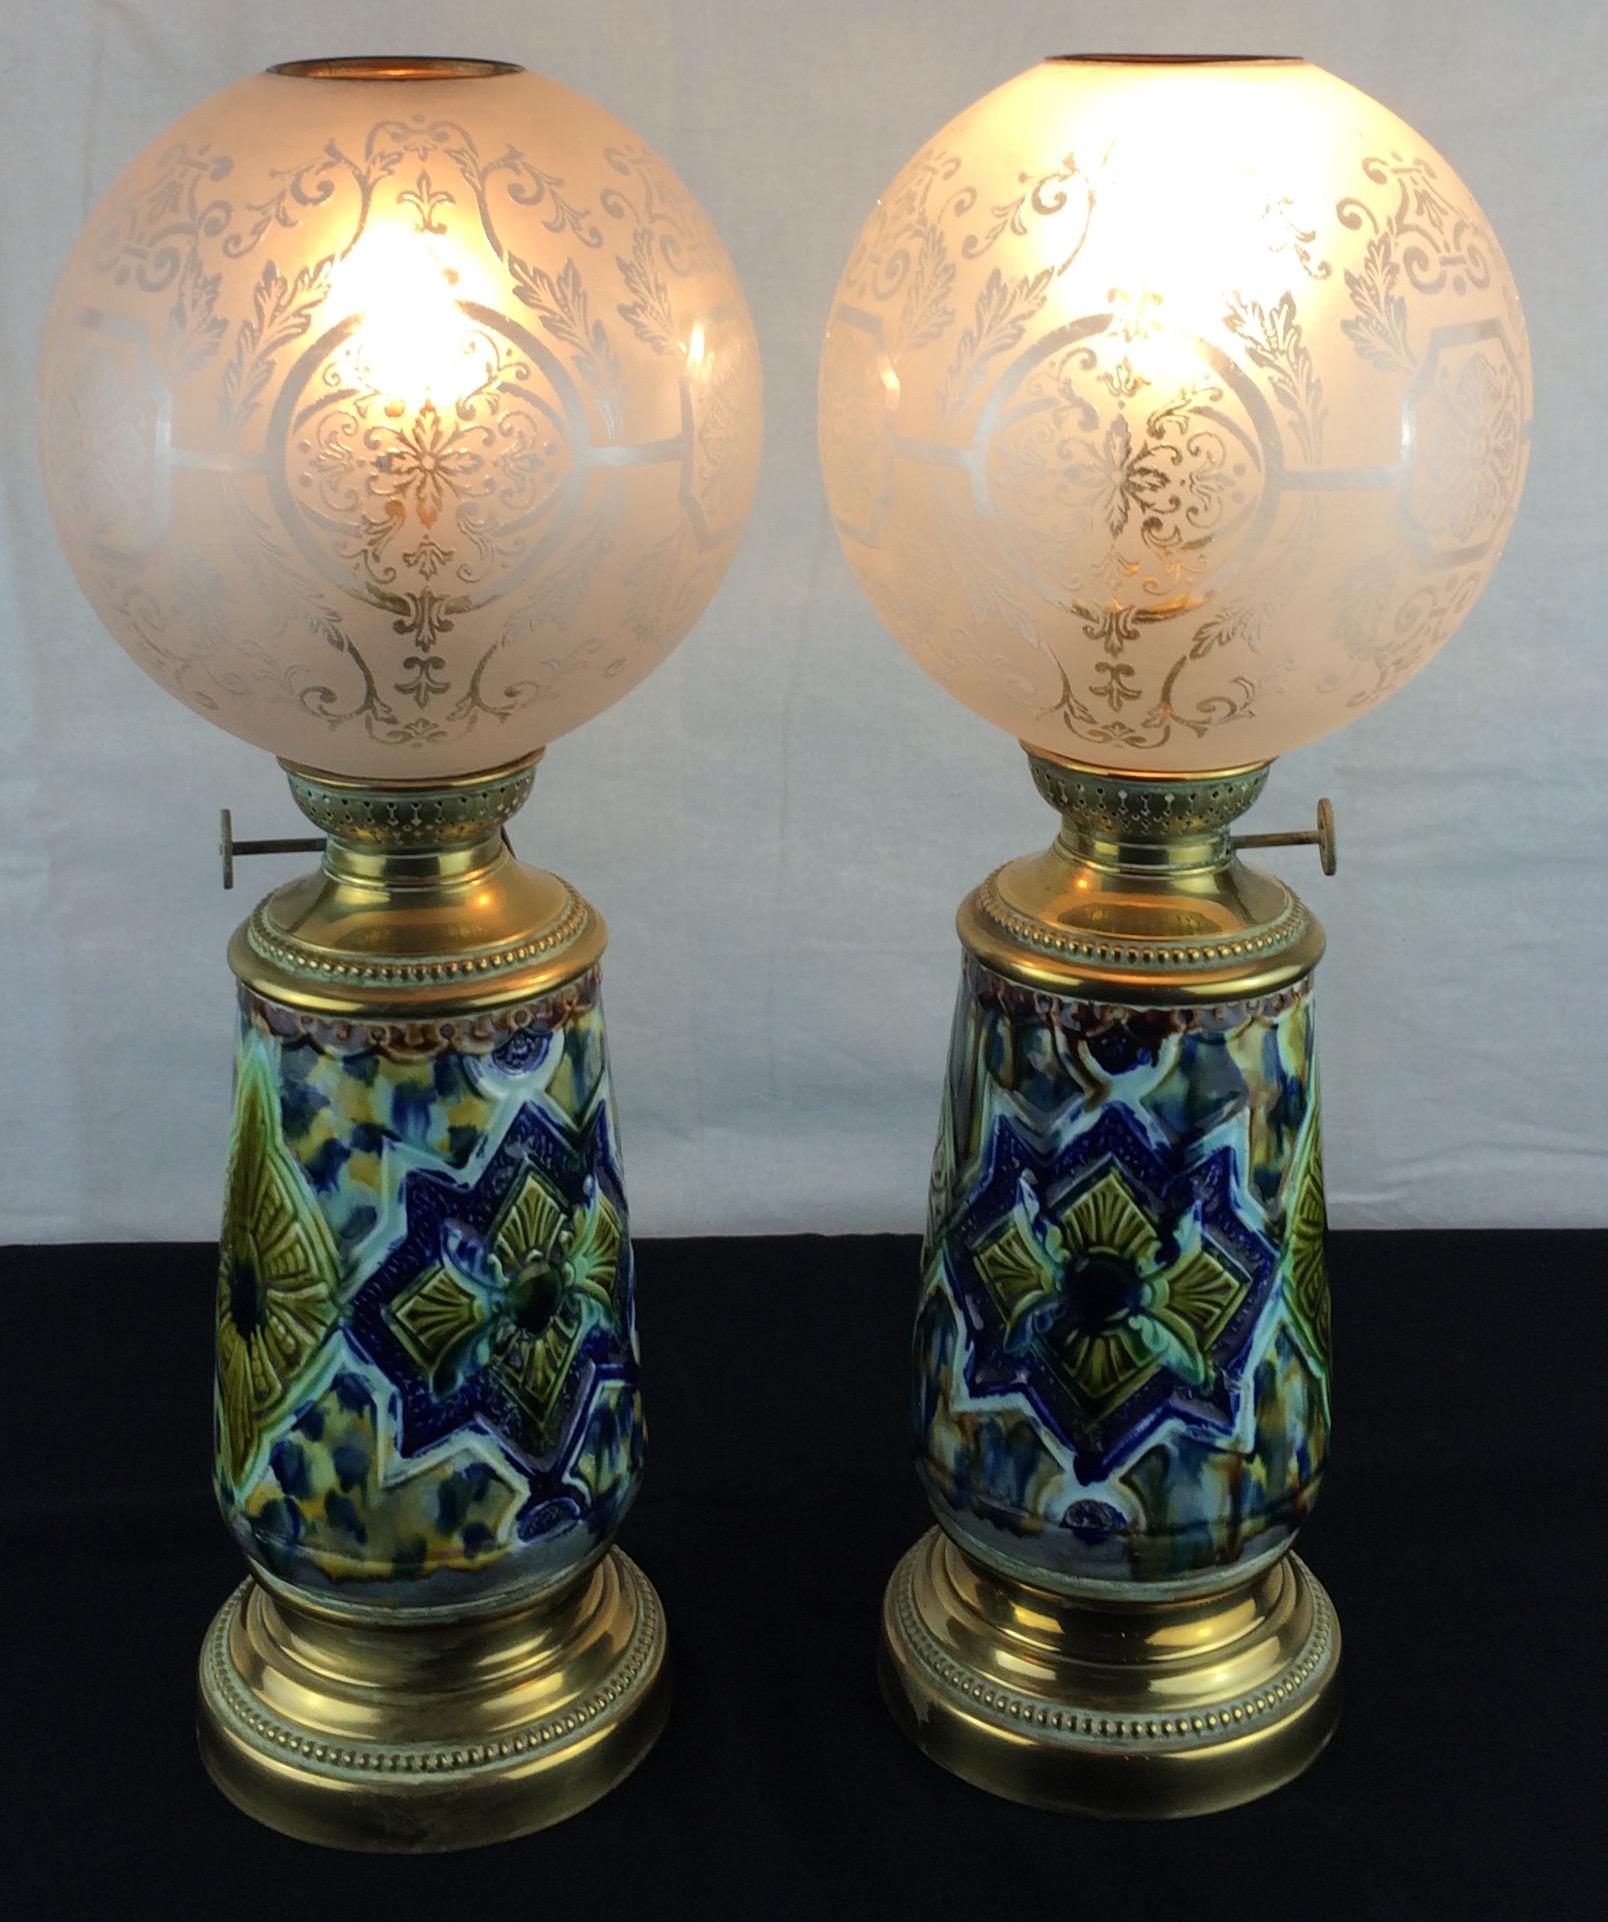 A wonderful pair of table lamps converted from oil lamps and electrified. 

The lamps feature swirl-patterned glass ball shades. These cover the burners, which top gilt brass pierced collars with wick-raiser handles. The lamps’ faience bodies are